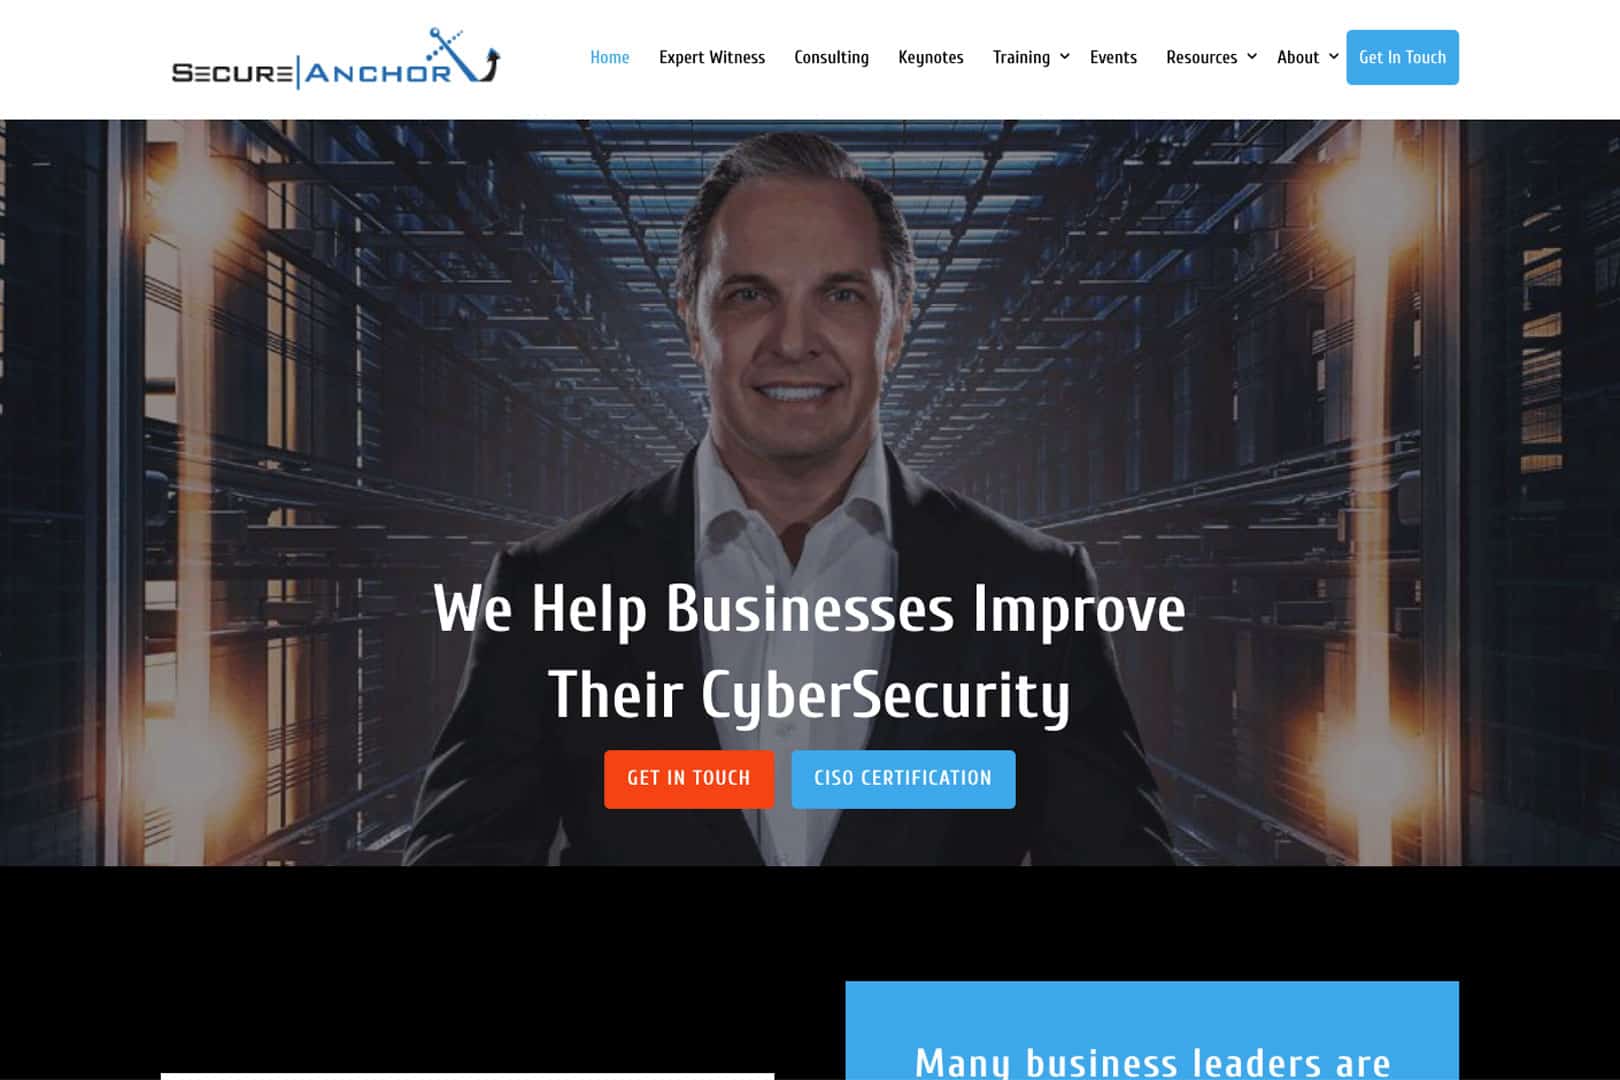 Secure Anchor home page